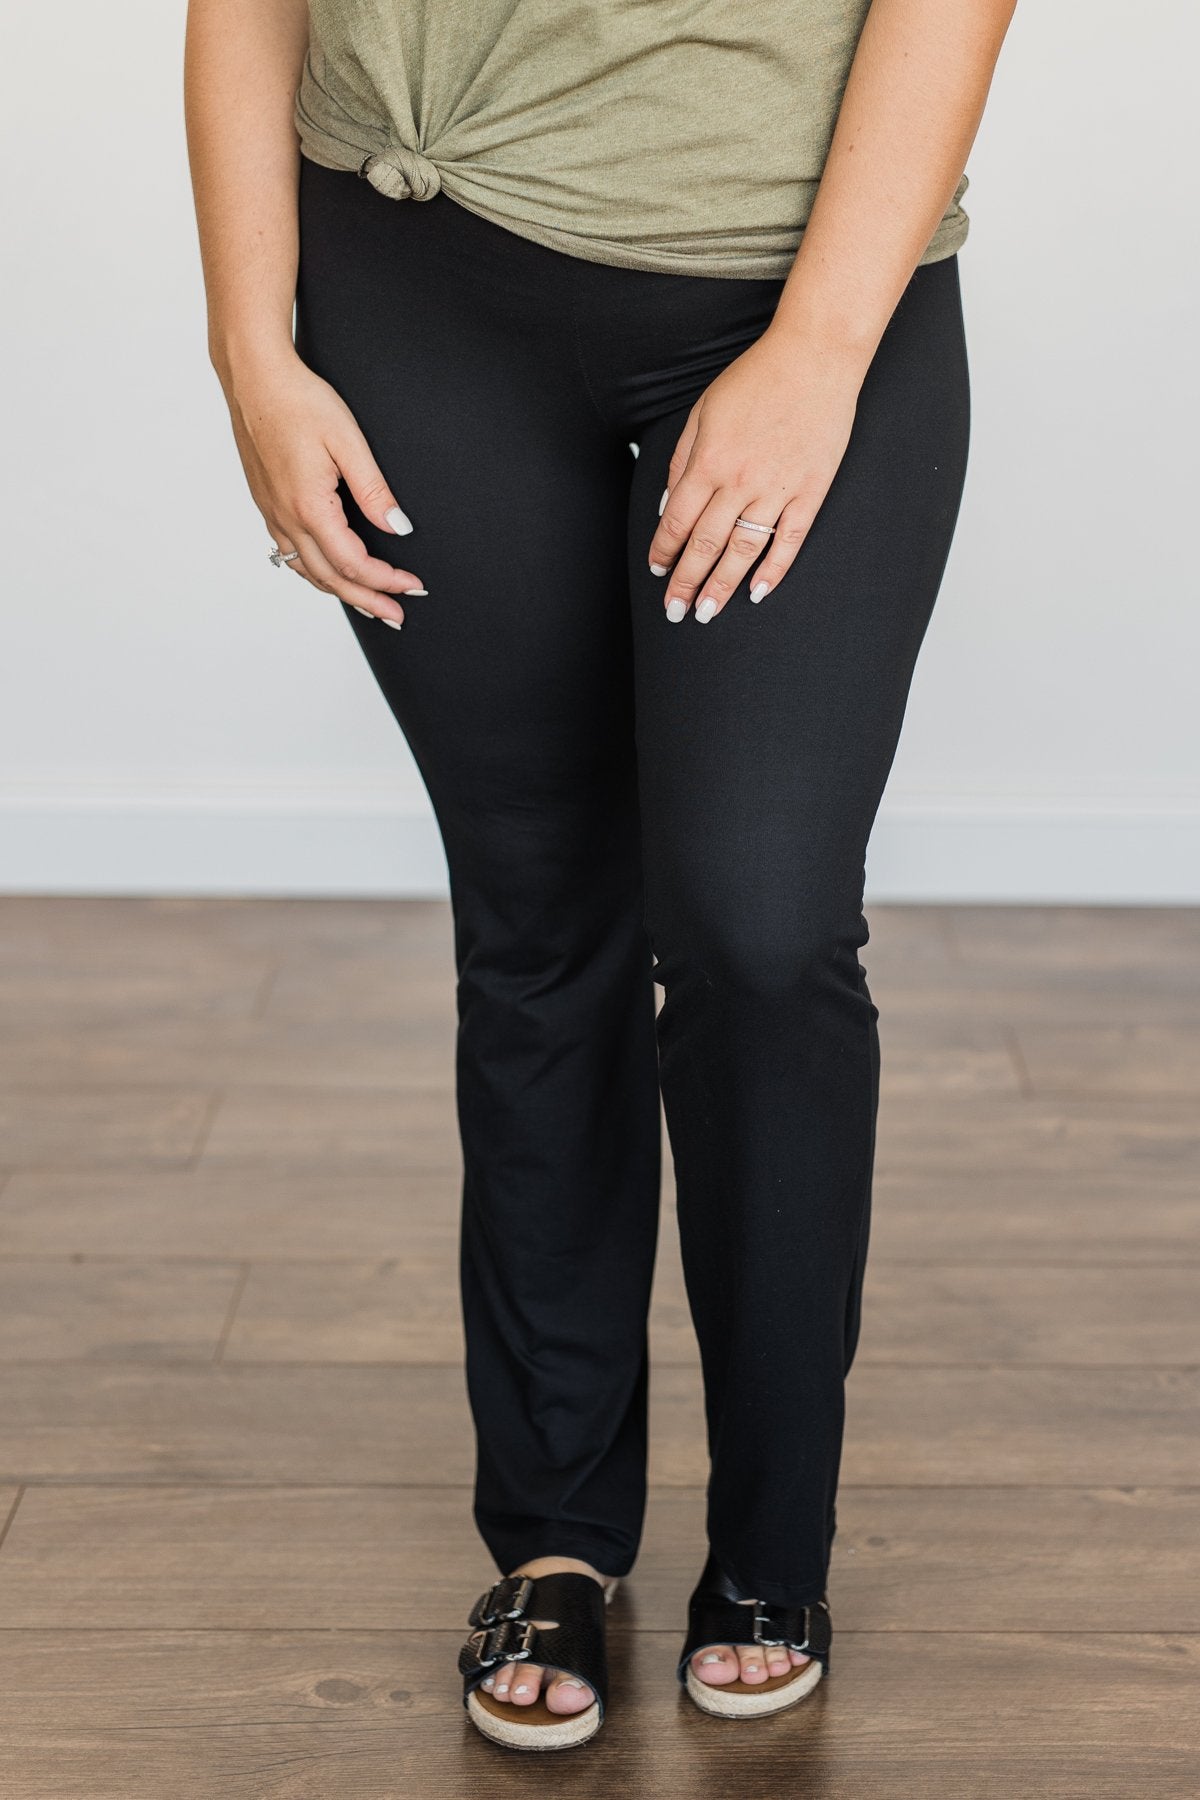 One Step At A Time Bootcut Leggings- Black – The Pulse Boutique